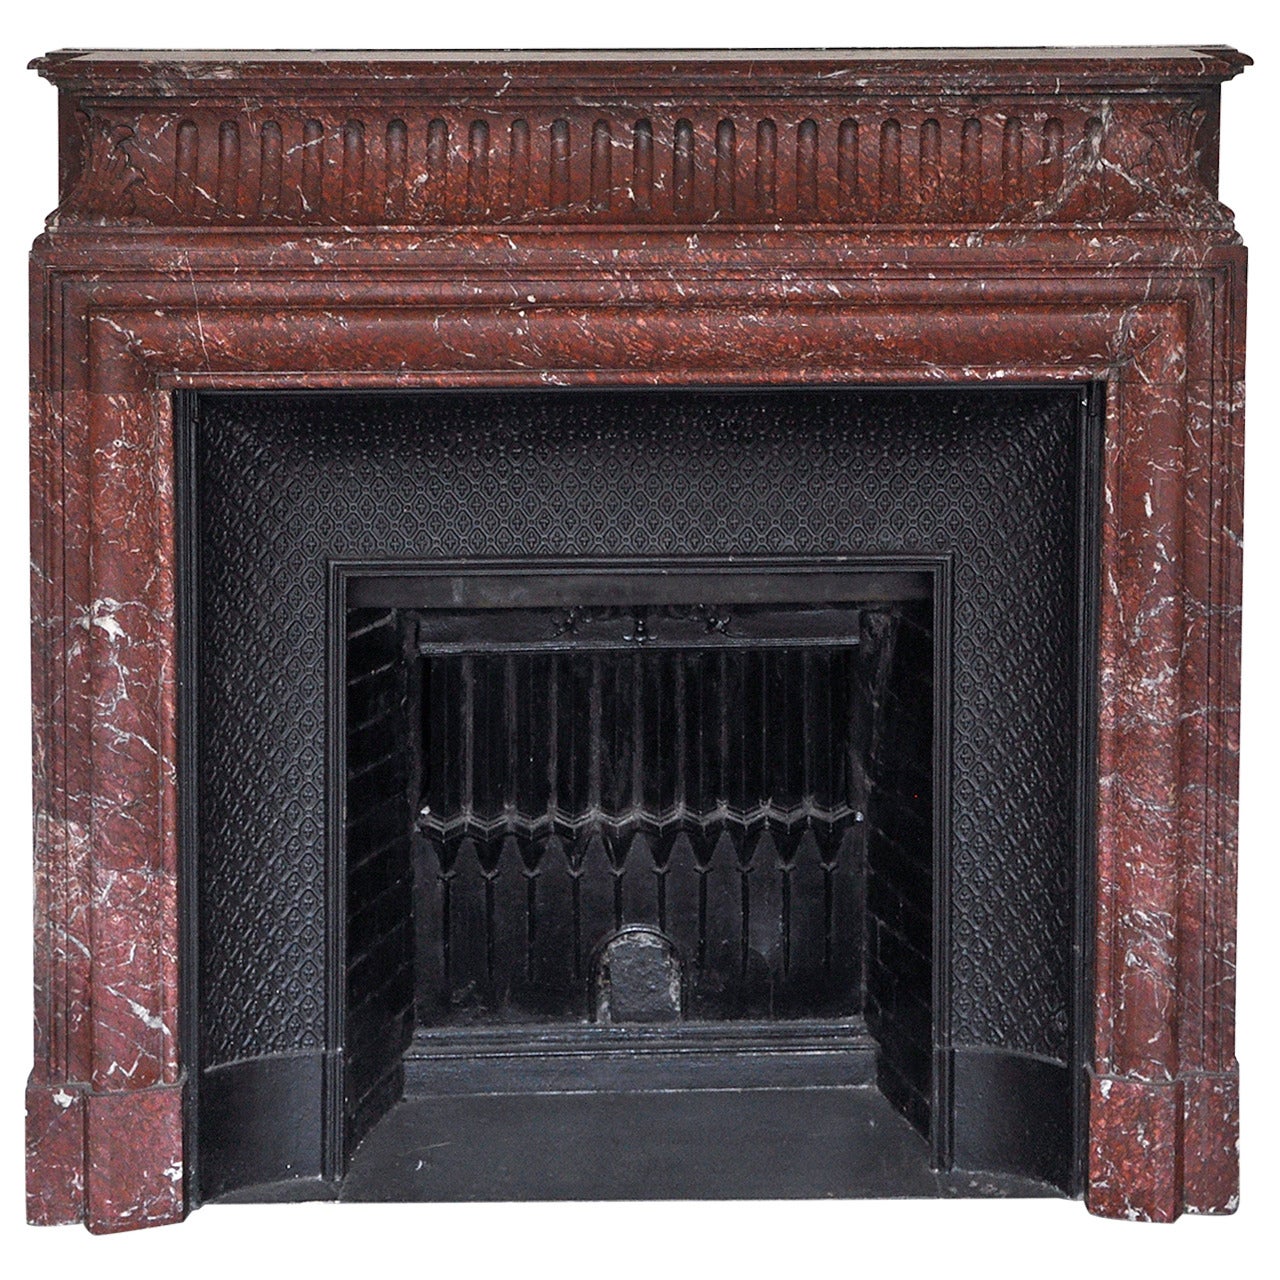 Louis XIV Style Fireplace with Acroterion, Red Griotte Marble